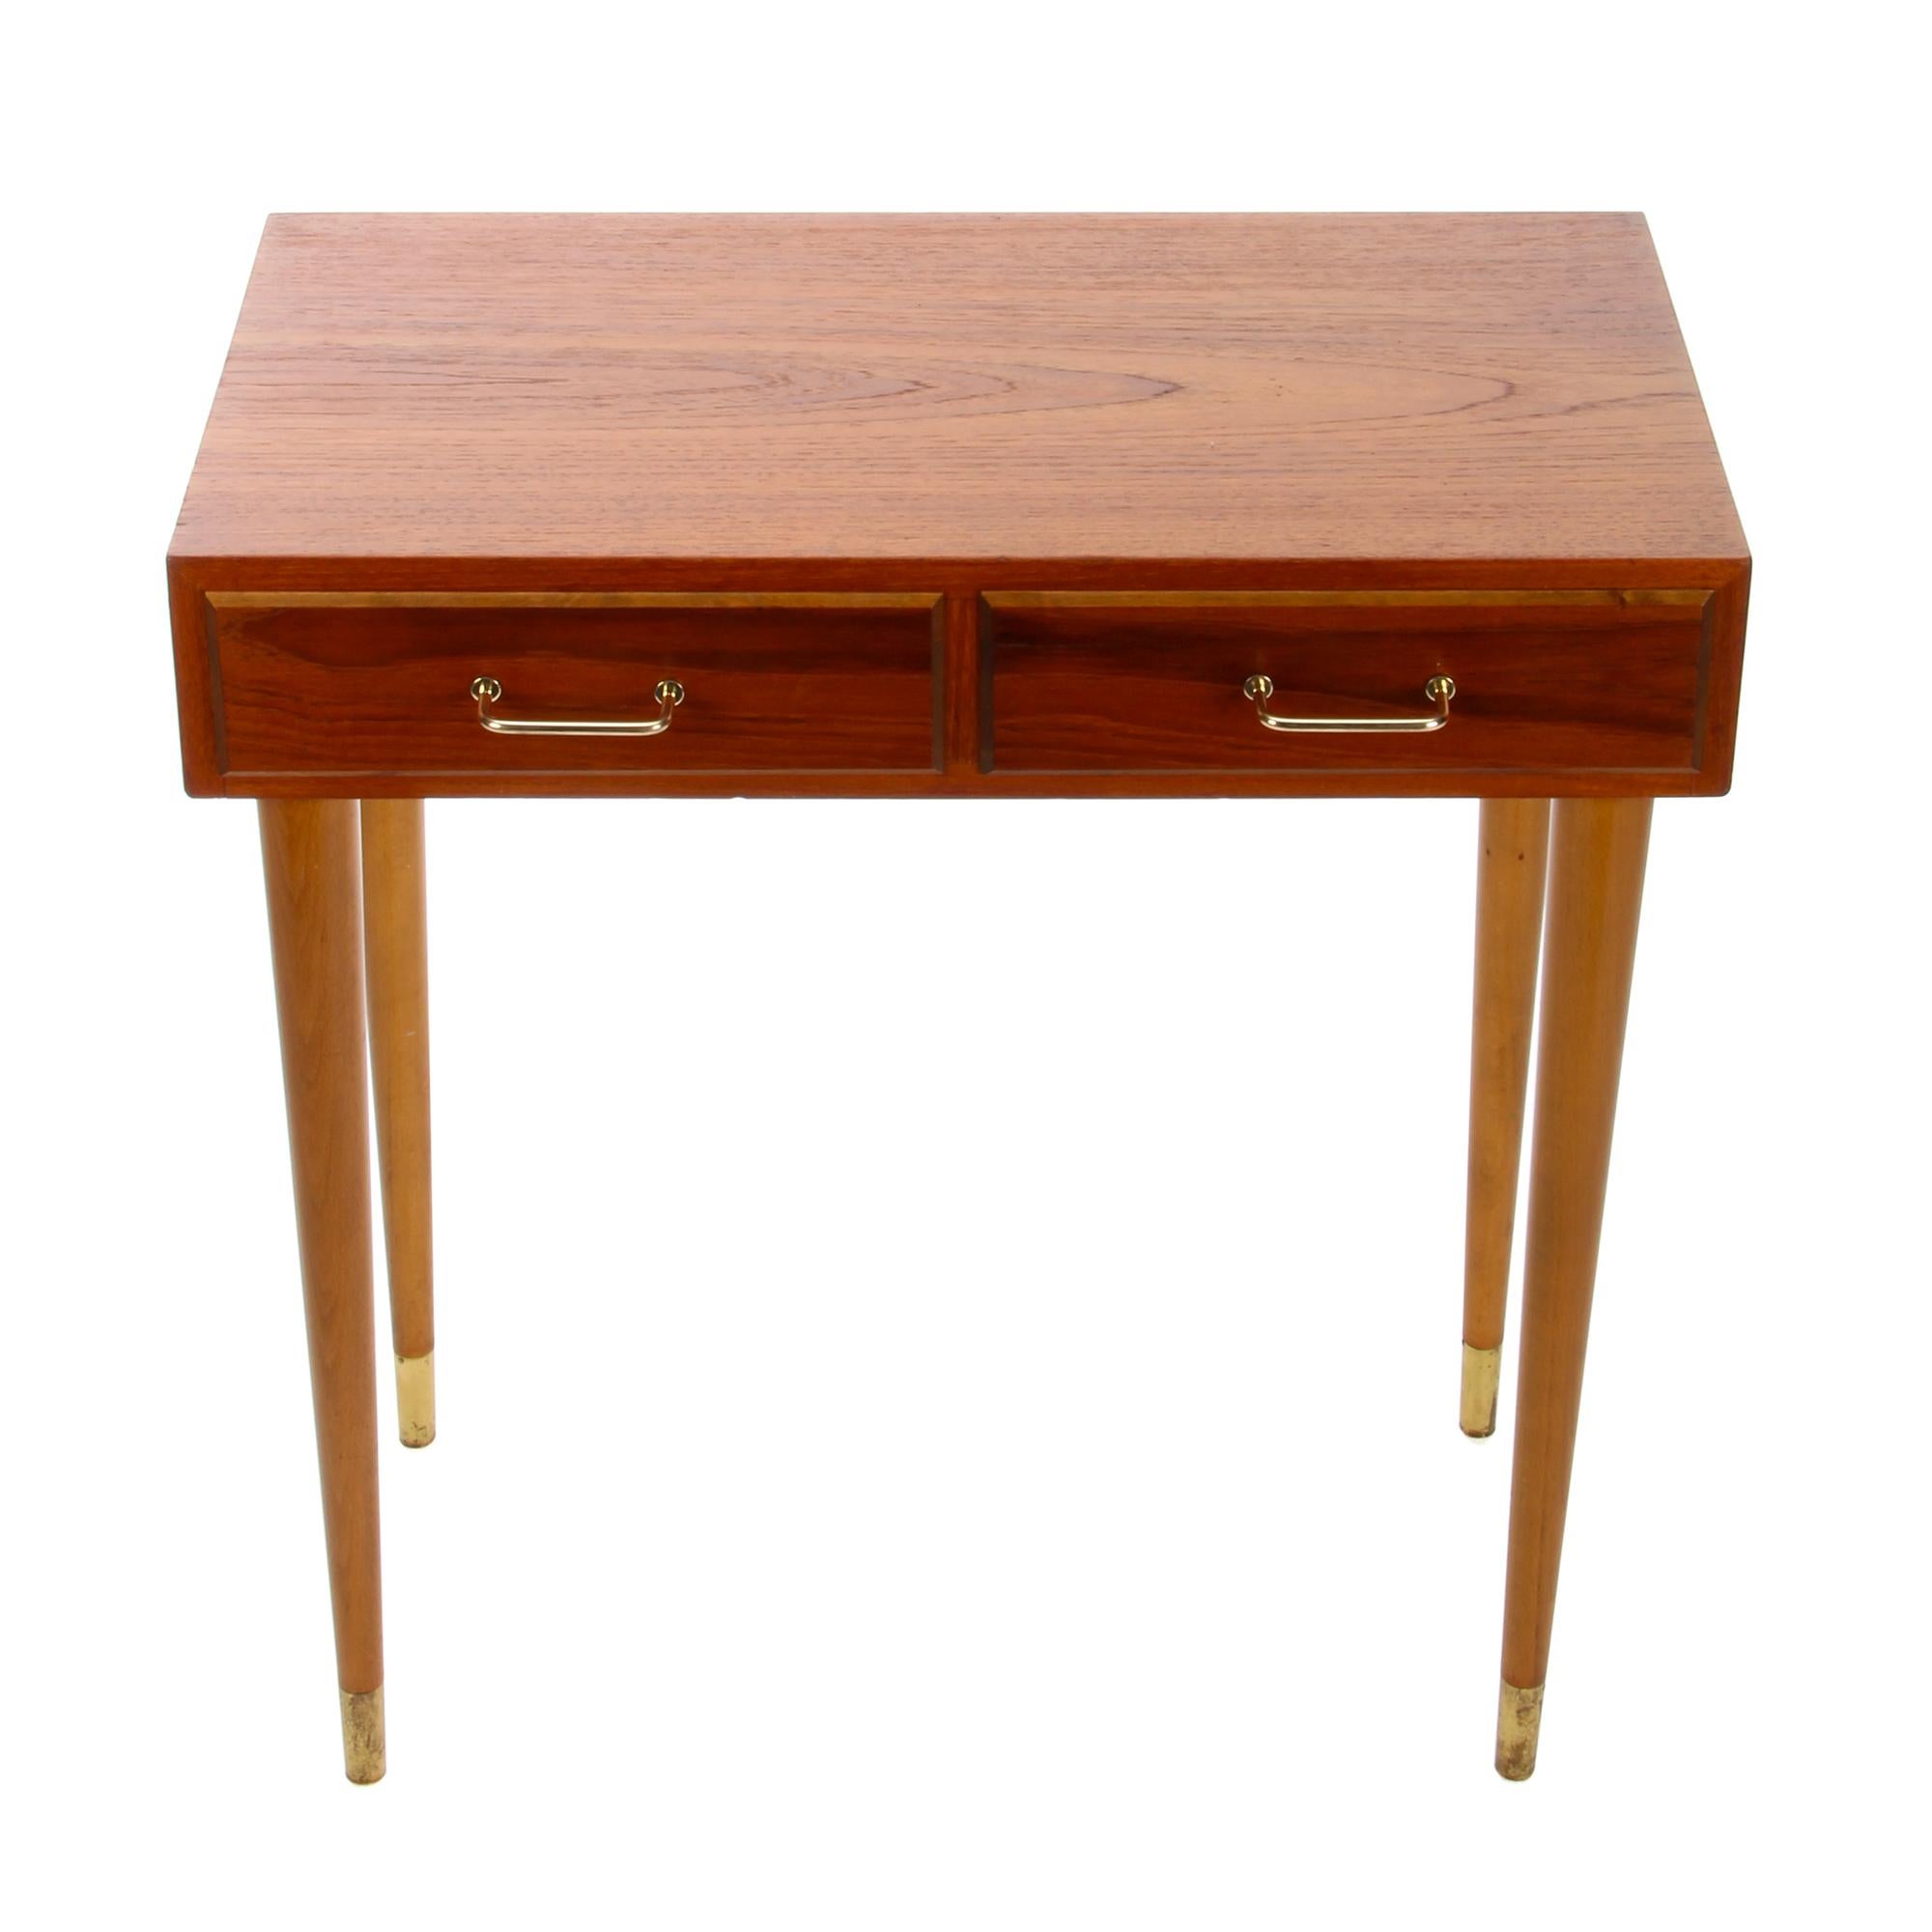 Teak Entry Table, 1960s Danish Console Table or Side Table with Two Drawers In Good Condition In Brondby, Copenhagen